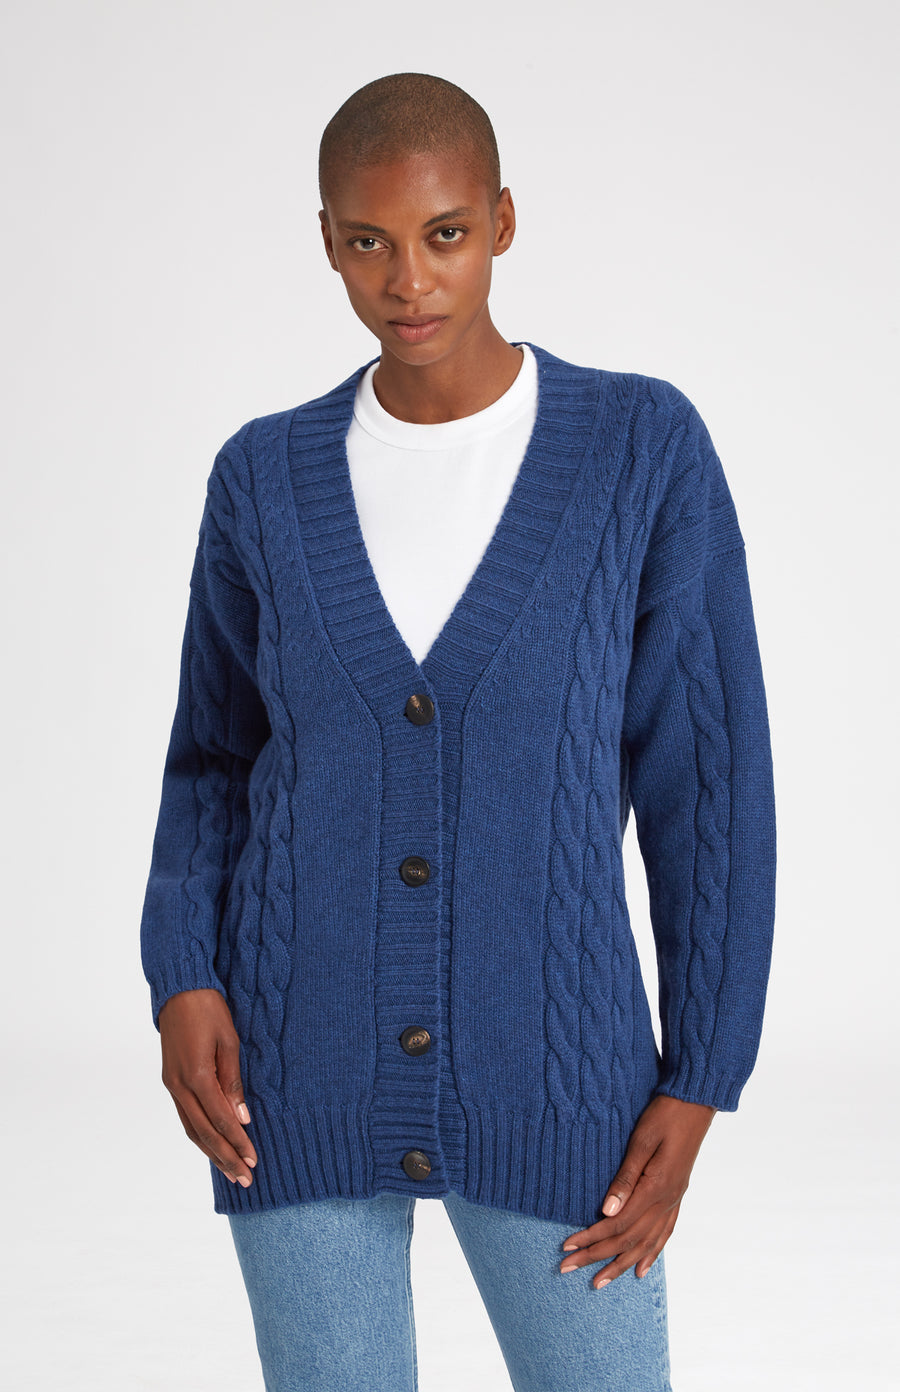 Superfine Wool Cardigan with Cable detail in Storm Blue - Pringle of Scotland